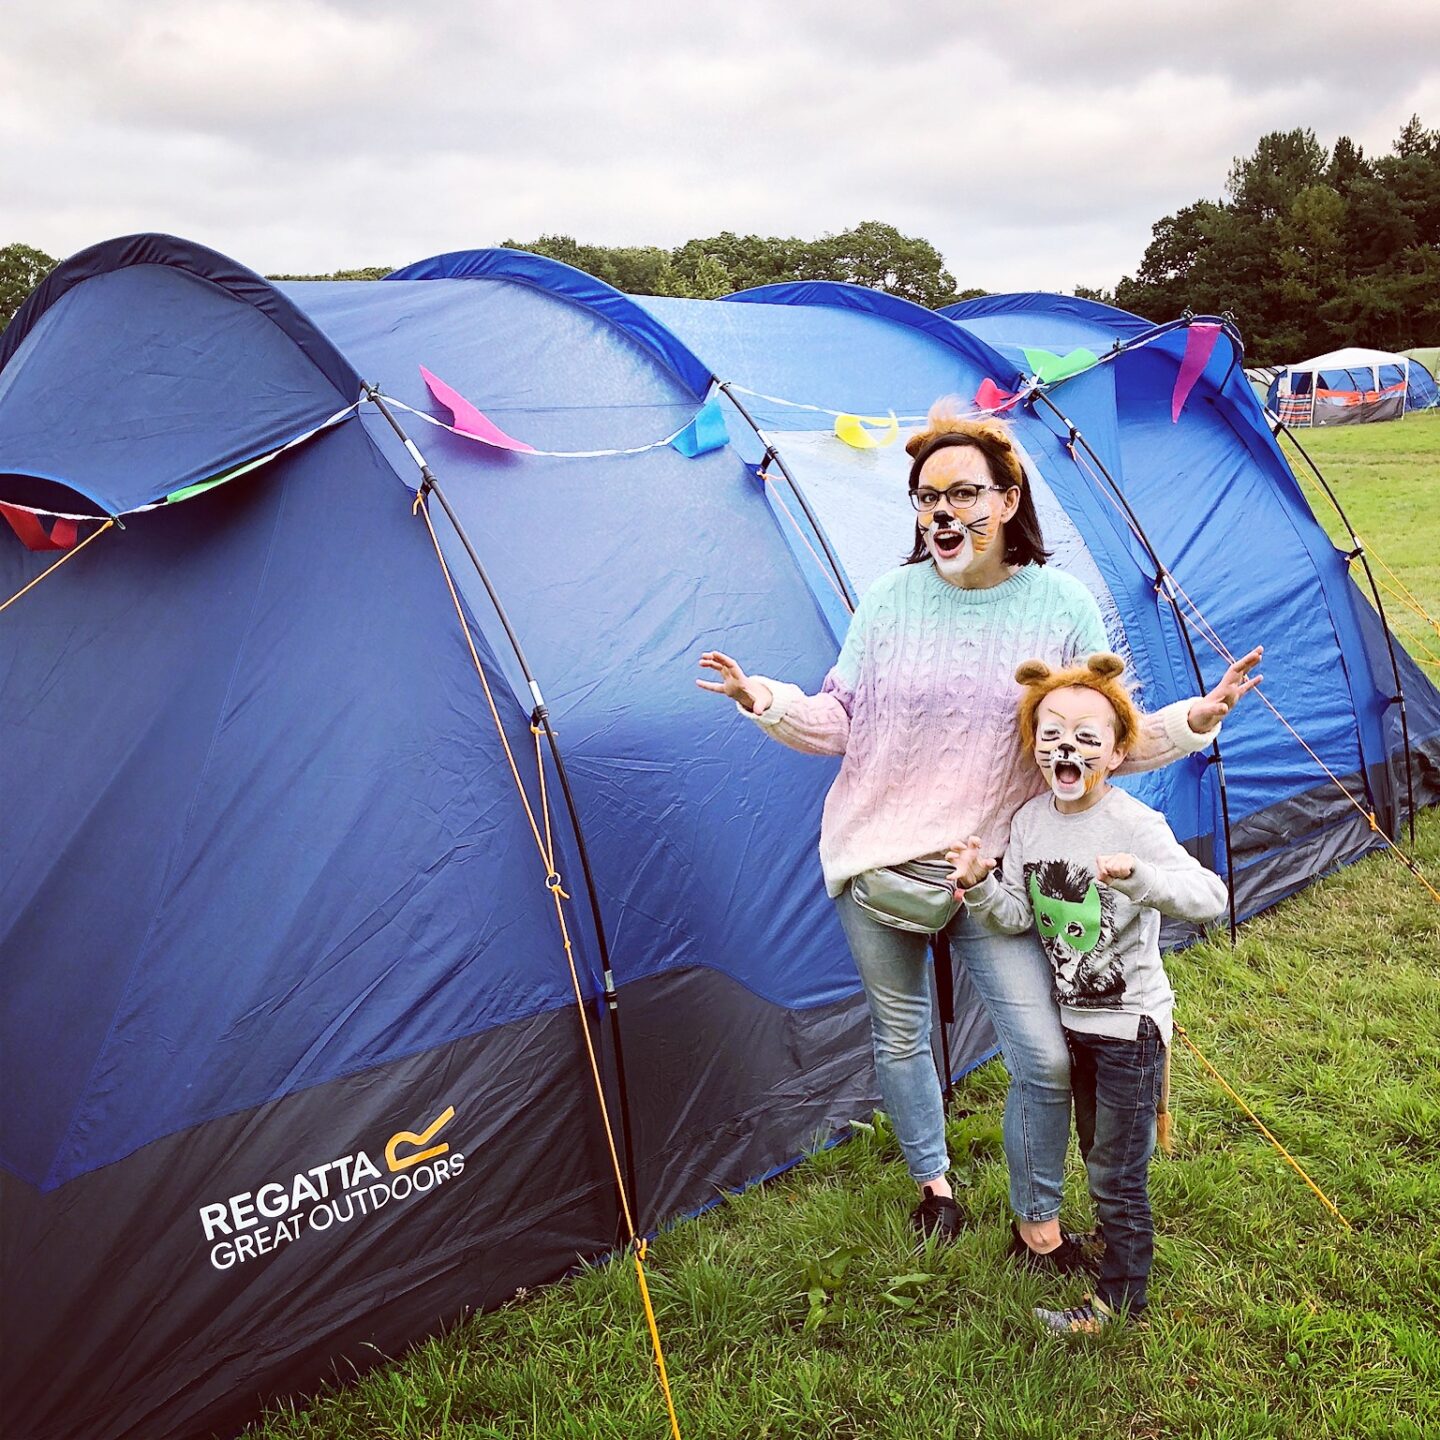 Festival camping tips for families from seasoned pros